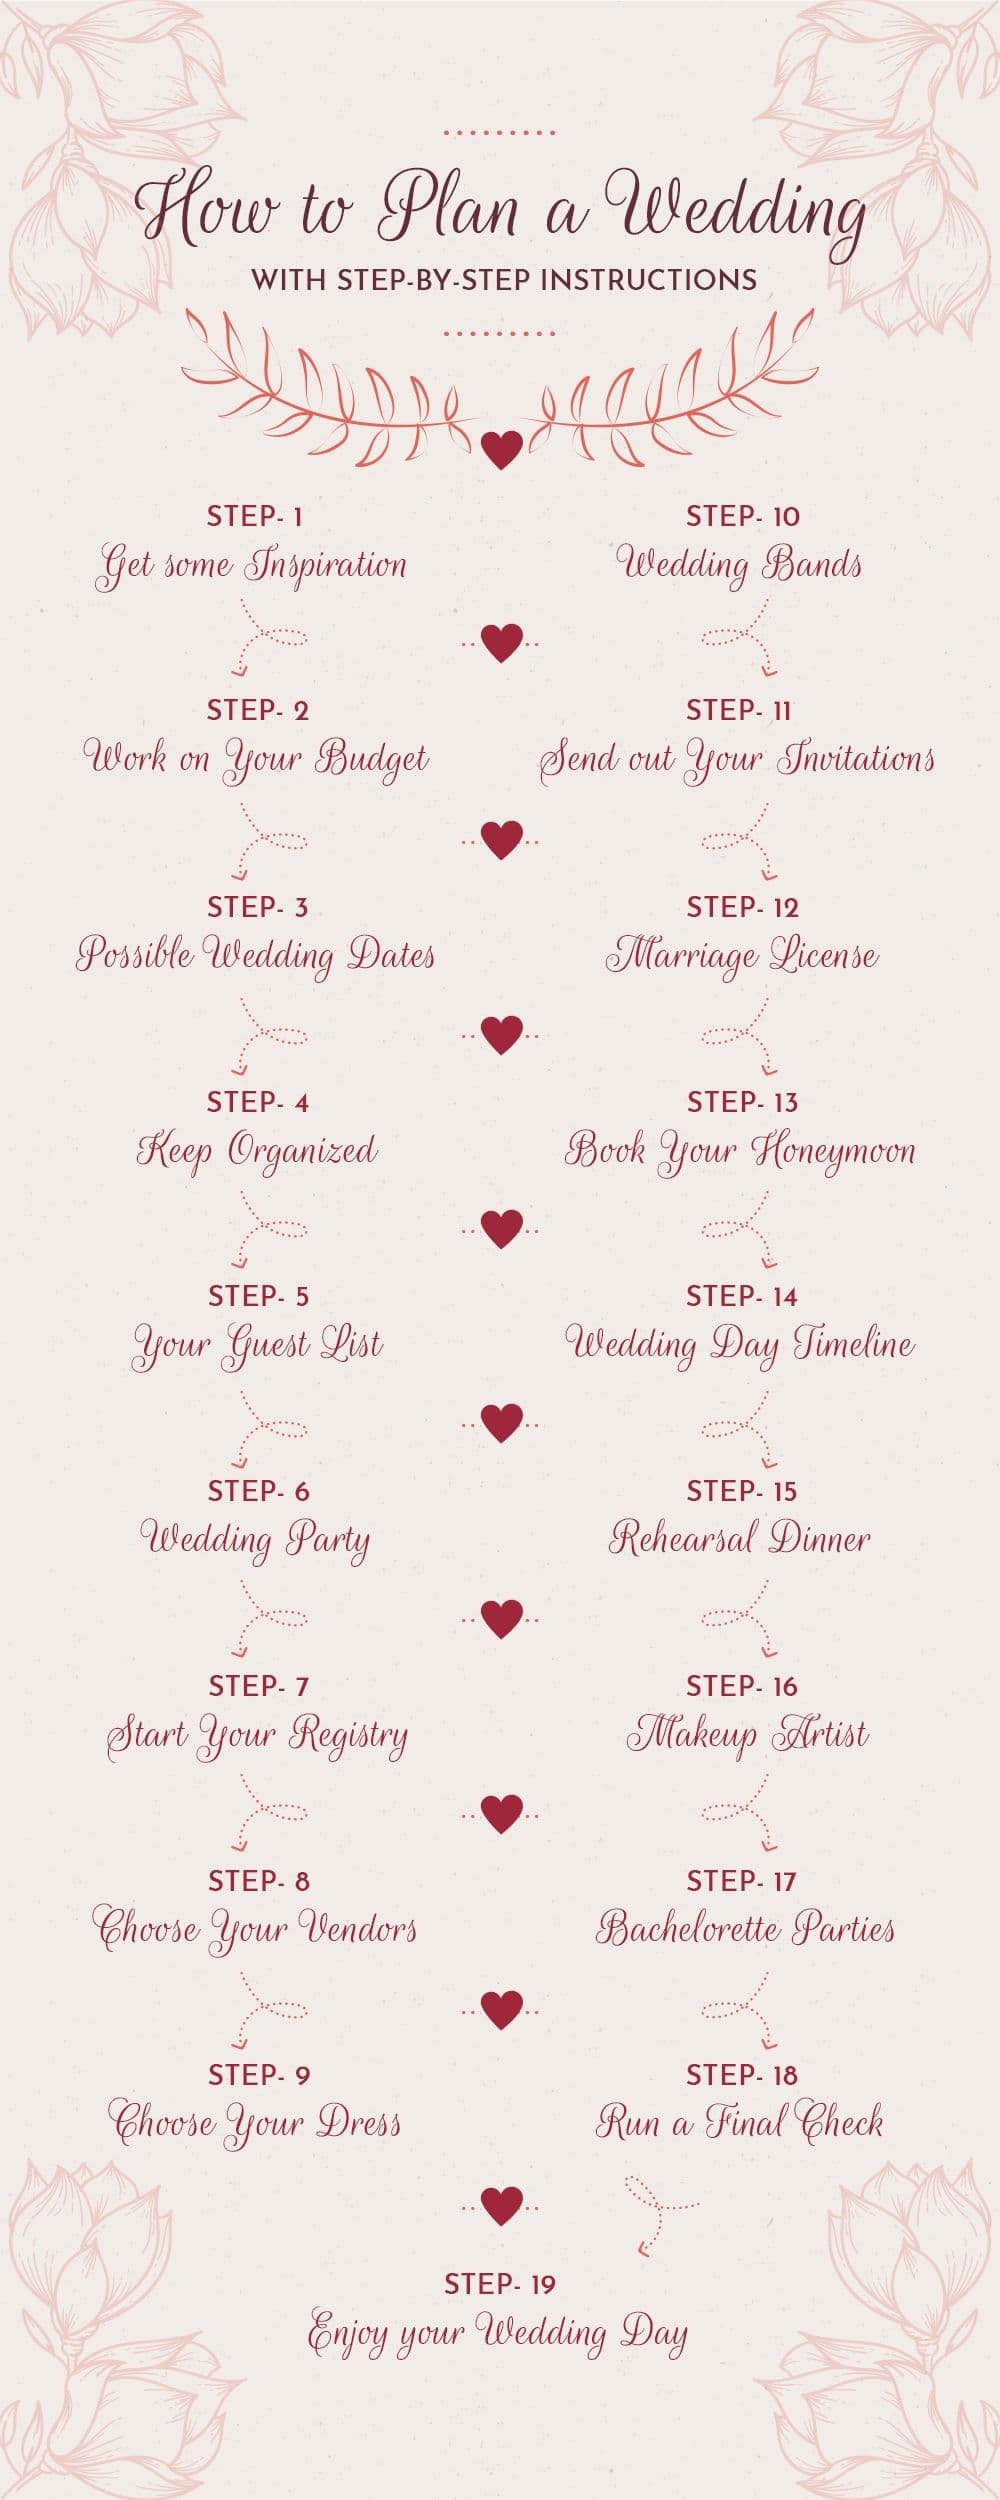 Infographic How to Plan a Wedding With Step-By-Step Instructions